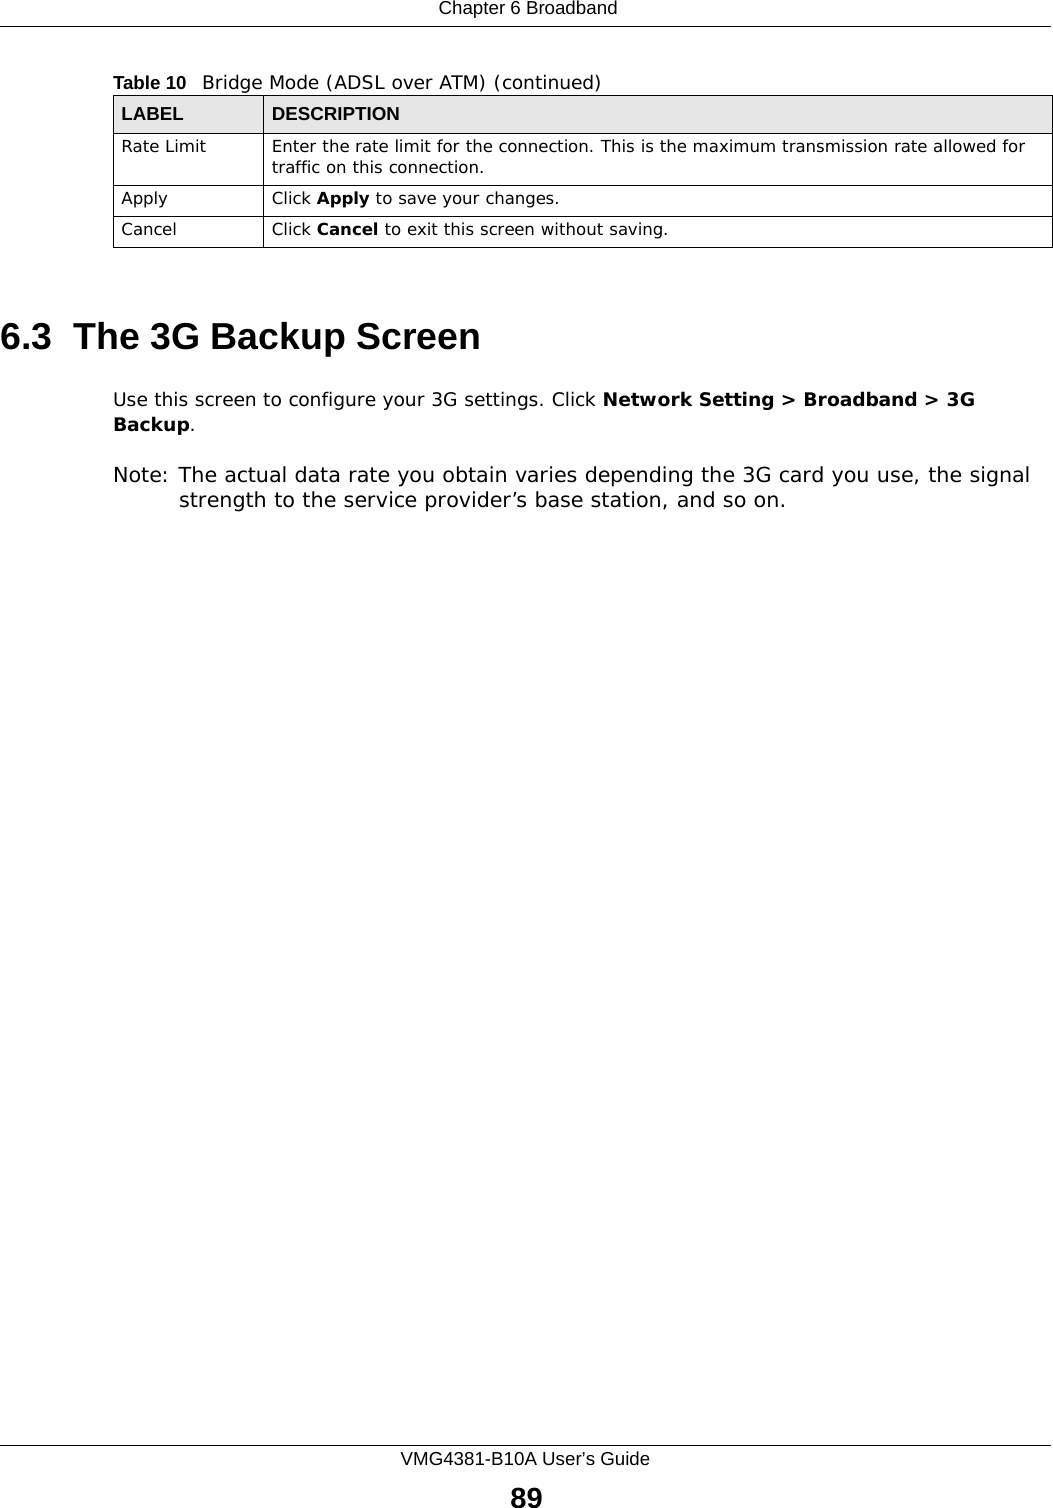  Chapter 6 BroadbandVMG4381-B10A User’s Guide896.3  The 3G Backup ScreenUse this screen to configure your 3G settings. Click Network Setting &gt; Broadband &gt; 3G Backup.Note: The actual data rate you obtain varies depending the 3G card you use, the signal strength to the service provider’s base station, and so on.Rate Limit Enter the rate limit for the connection. This is the maximum transmission rate allowed for traffic on this connection.Apply Click Apply to save your changes.Cancel Click Cancel to exit this screen without saving.Table 10   Bridge Mode (ADSL over ATM) (continued)LABEL DESCRIPTION